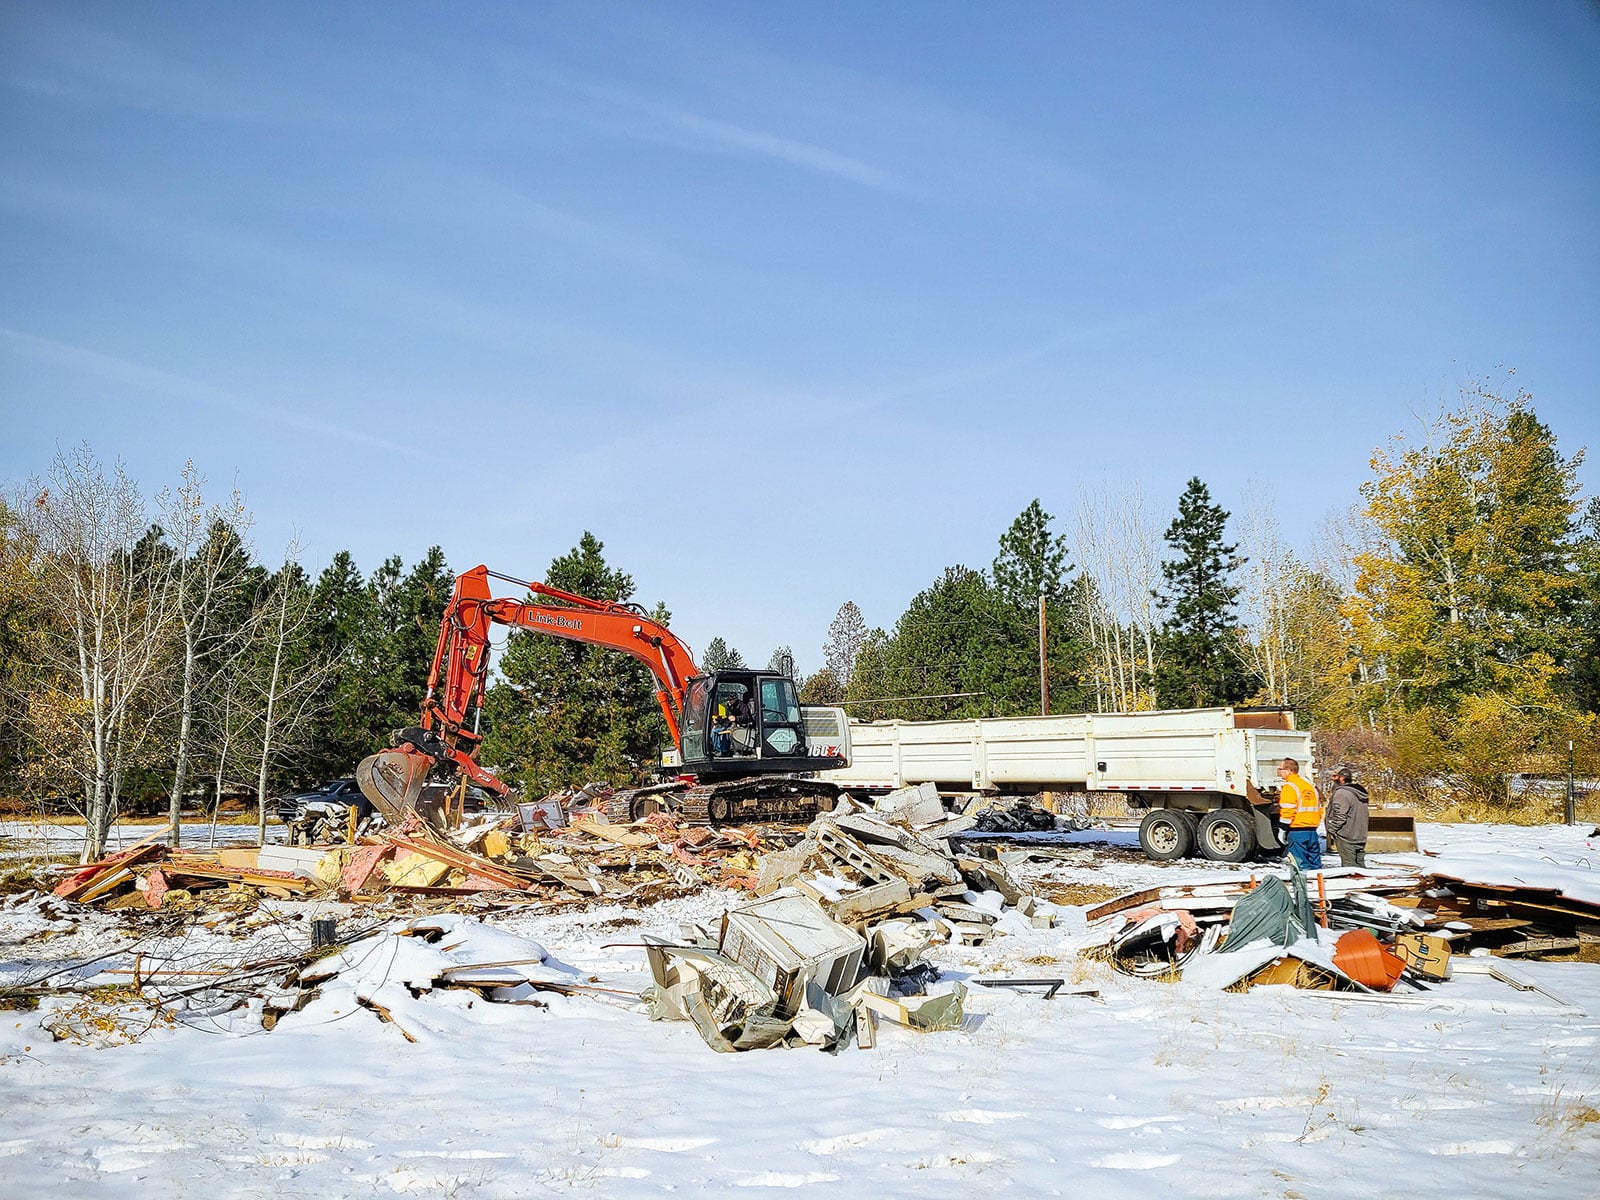 Excavator moving piles of debris into a large dump truck